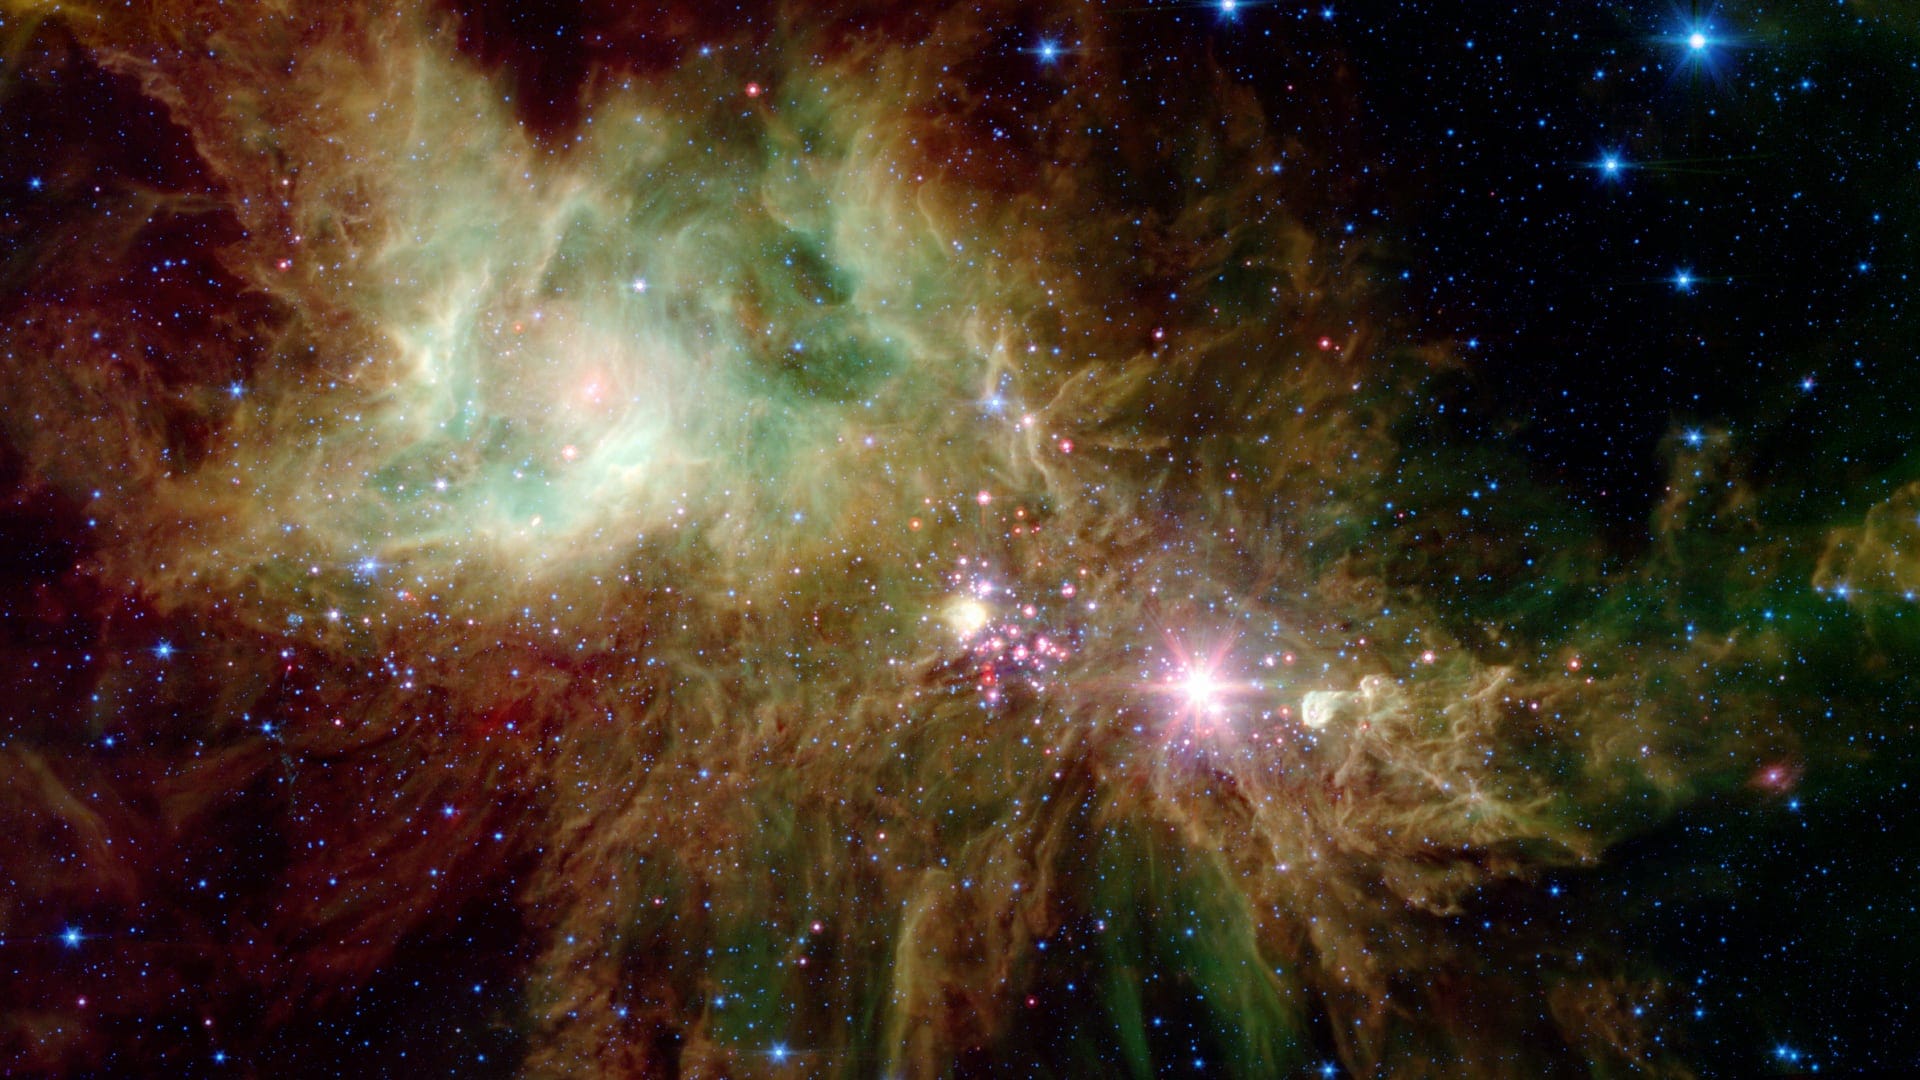 Christmas Tree Cluster and the Cone Nebula